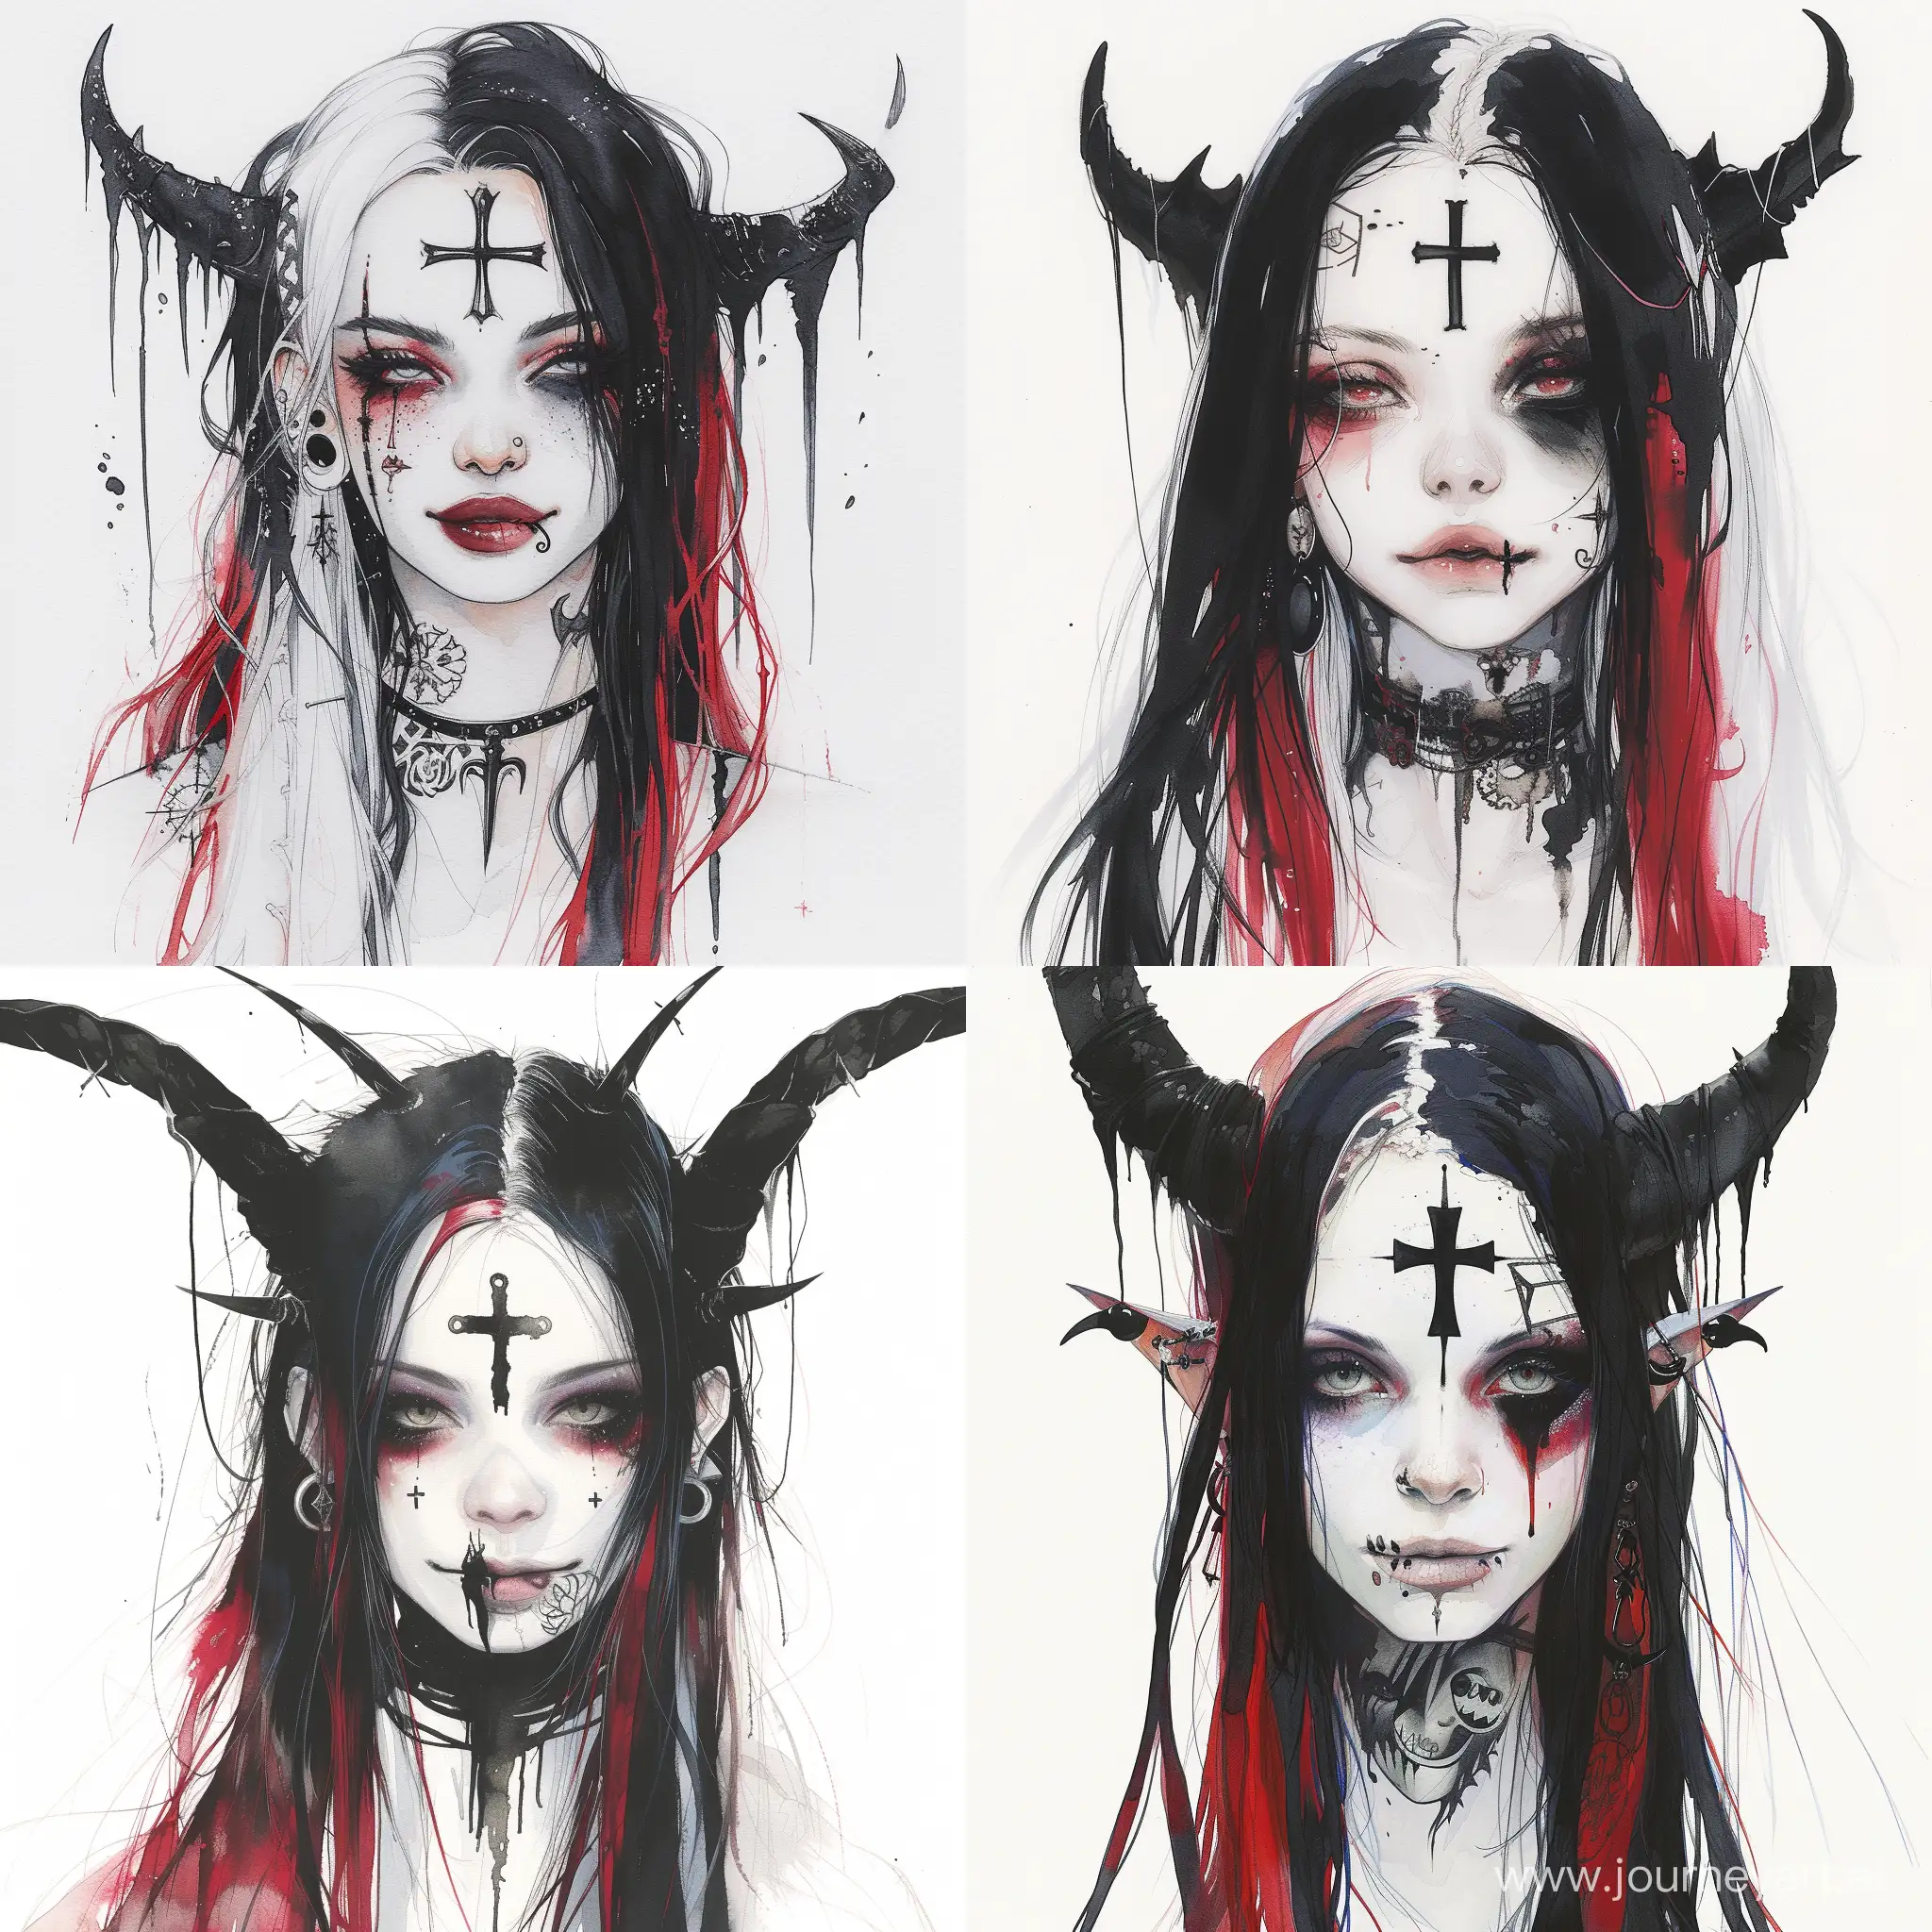 Anime-Woman-with-Striking-DemonInspired-Features-and-Watercolor-Aesthetics